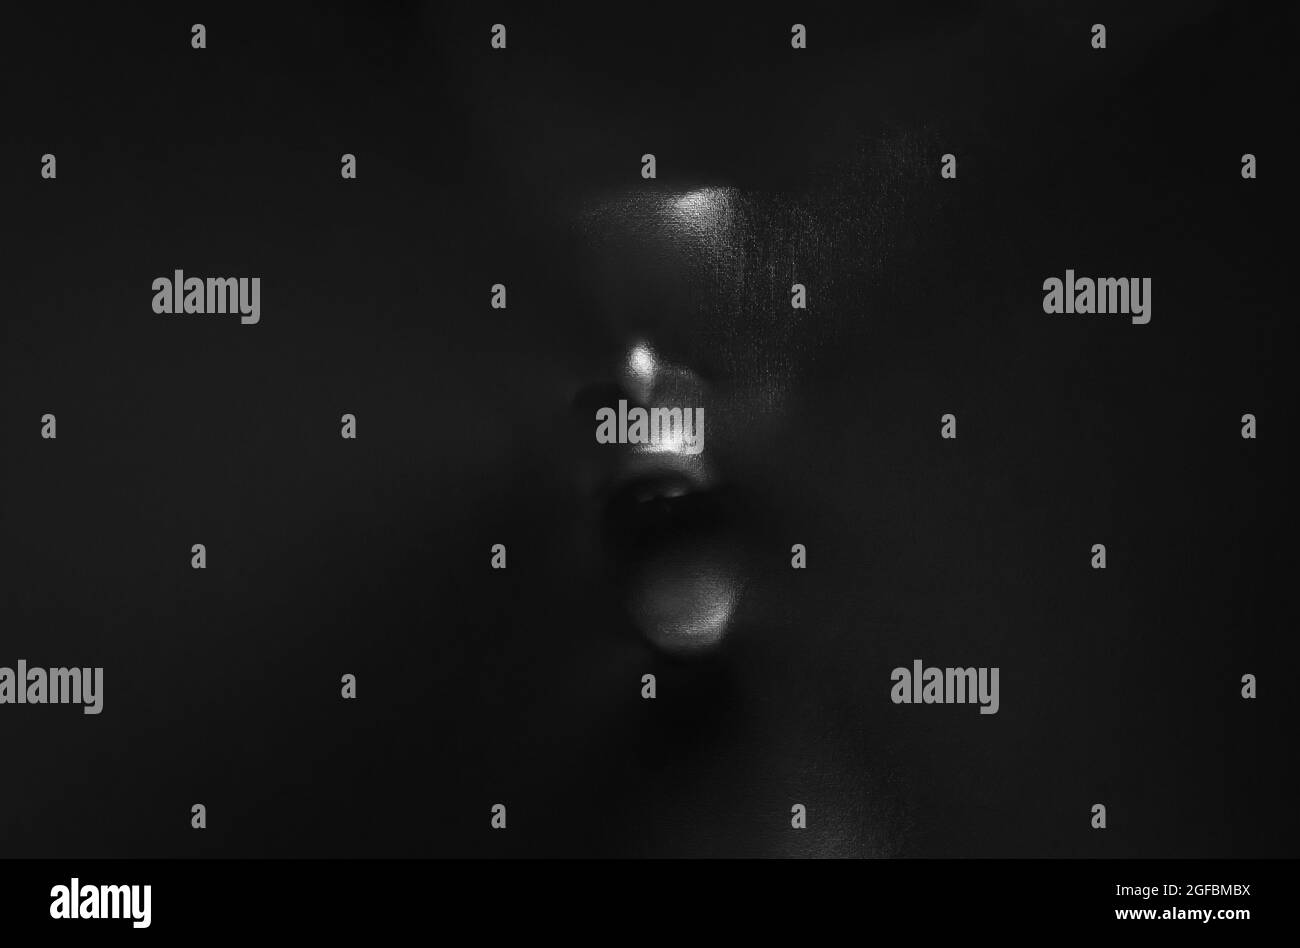 Screaming human face pressing through black fabric with shine and dark side for Halloween background concept. Stock Photo